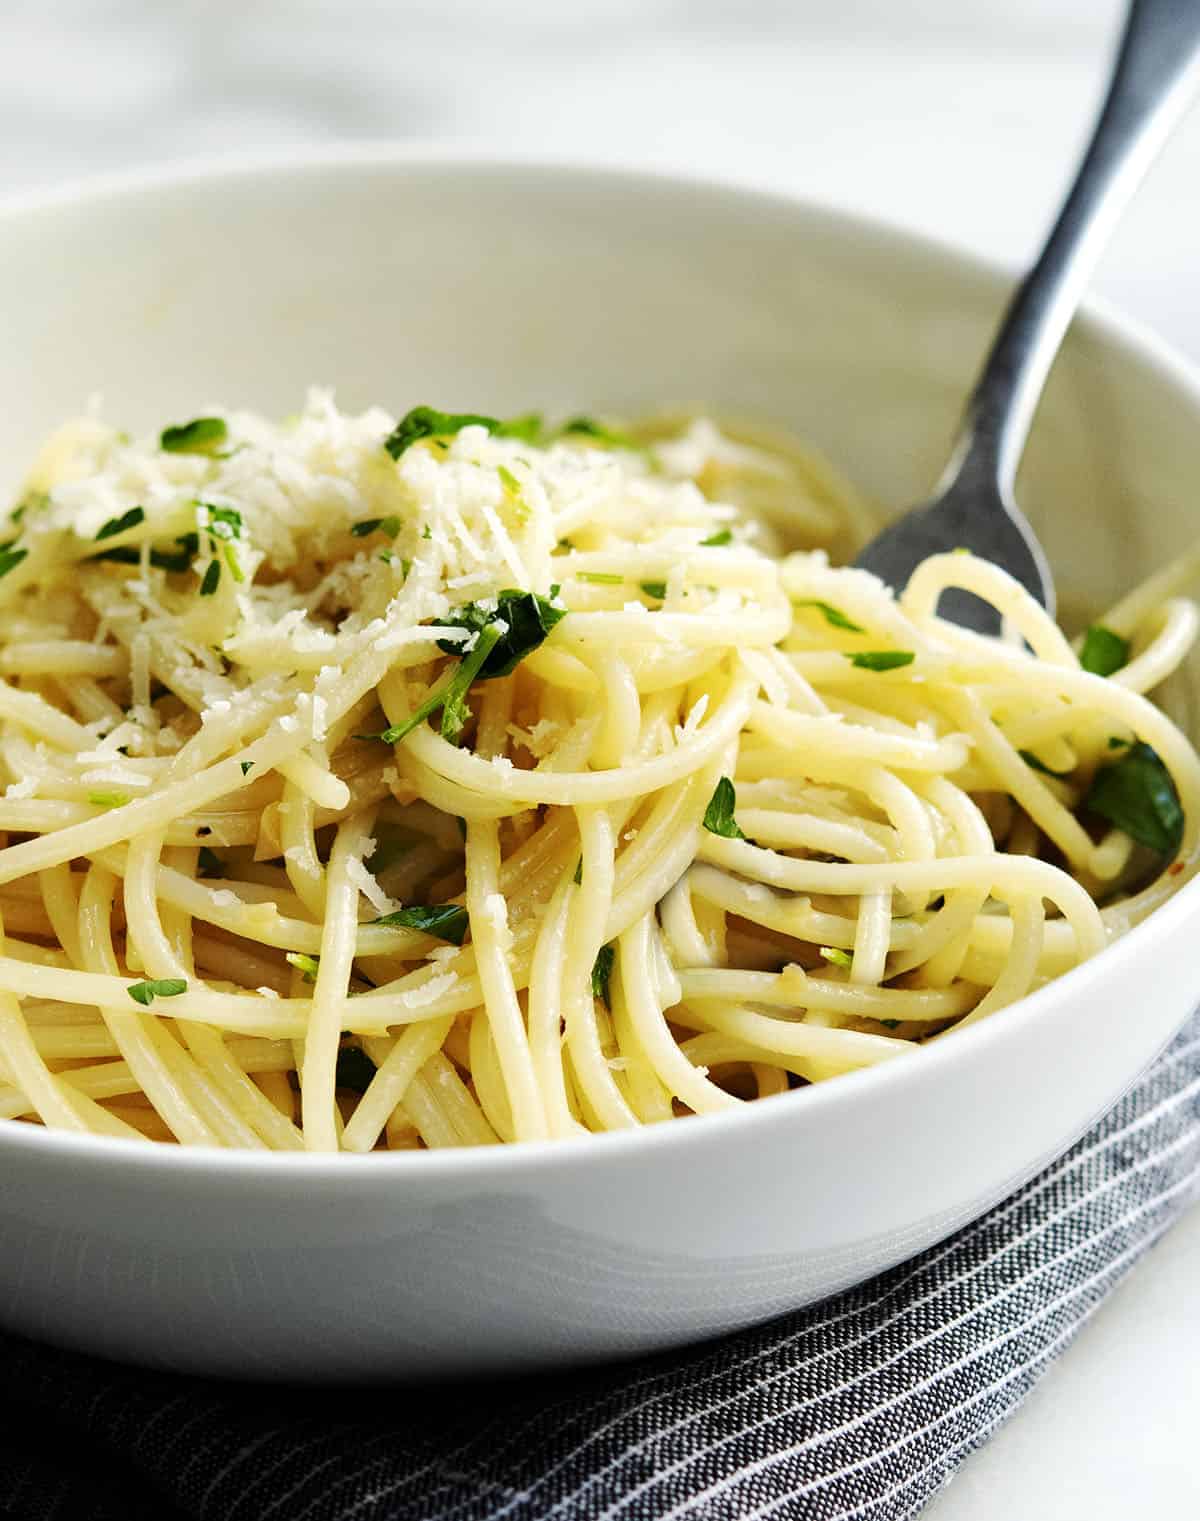 Garlic and Lemon Pasta with Herbs in a Bowl